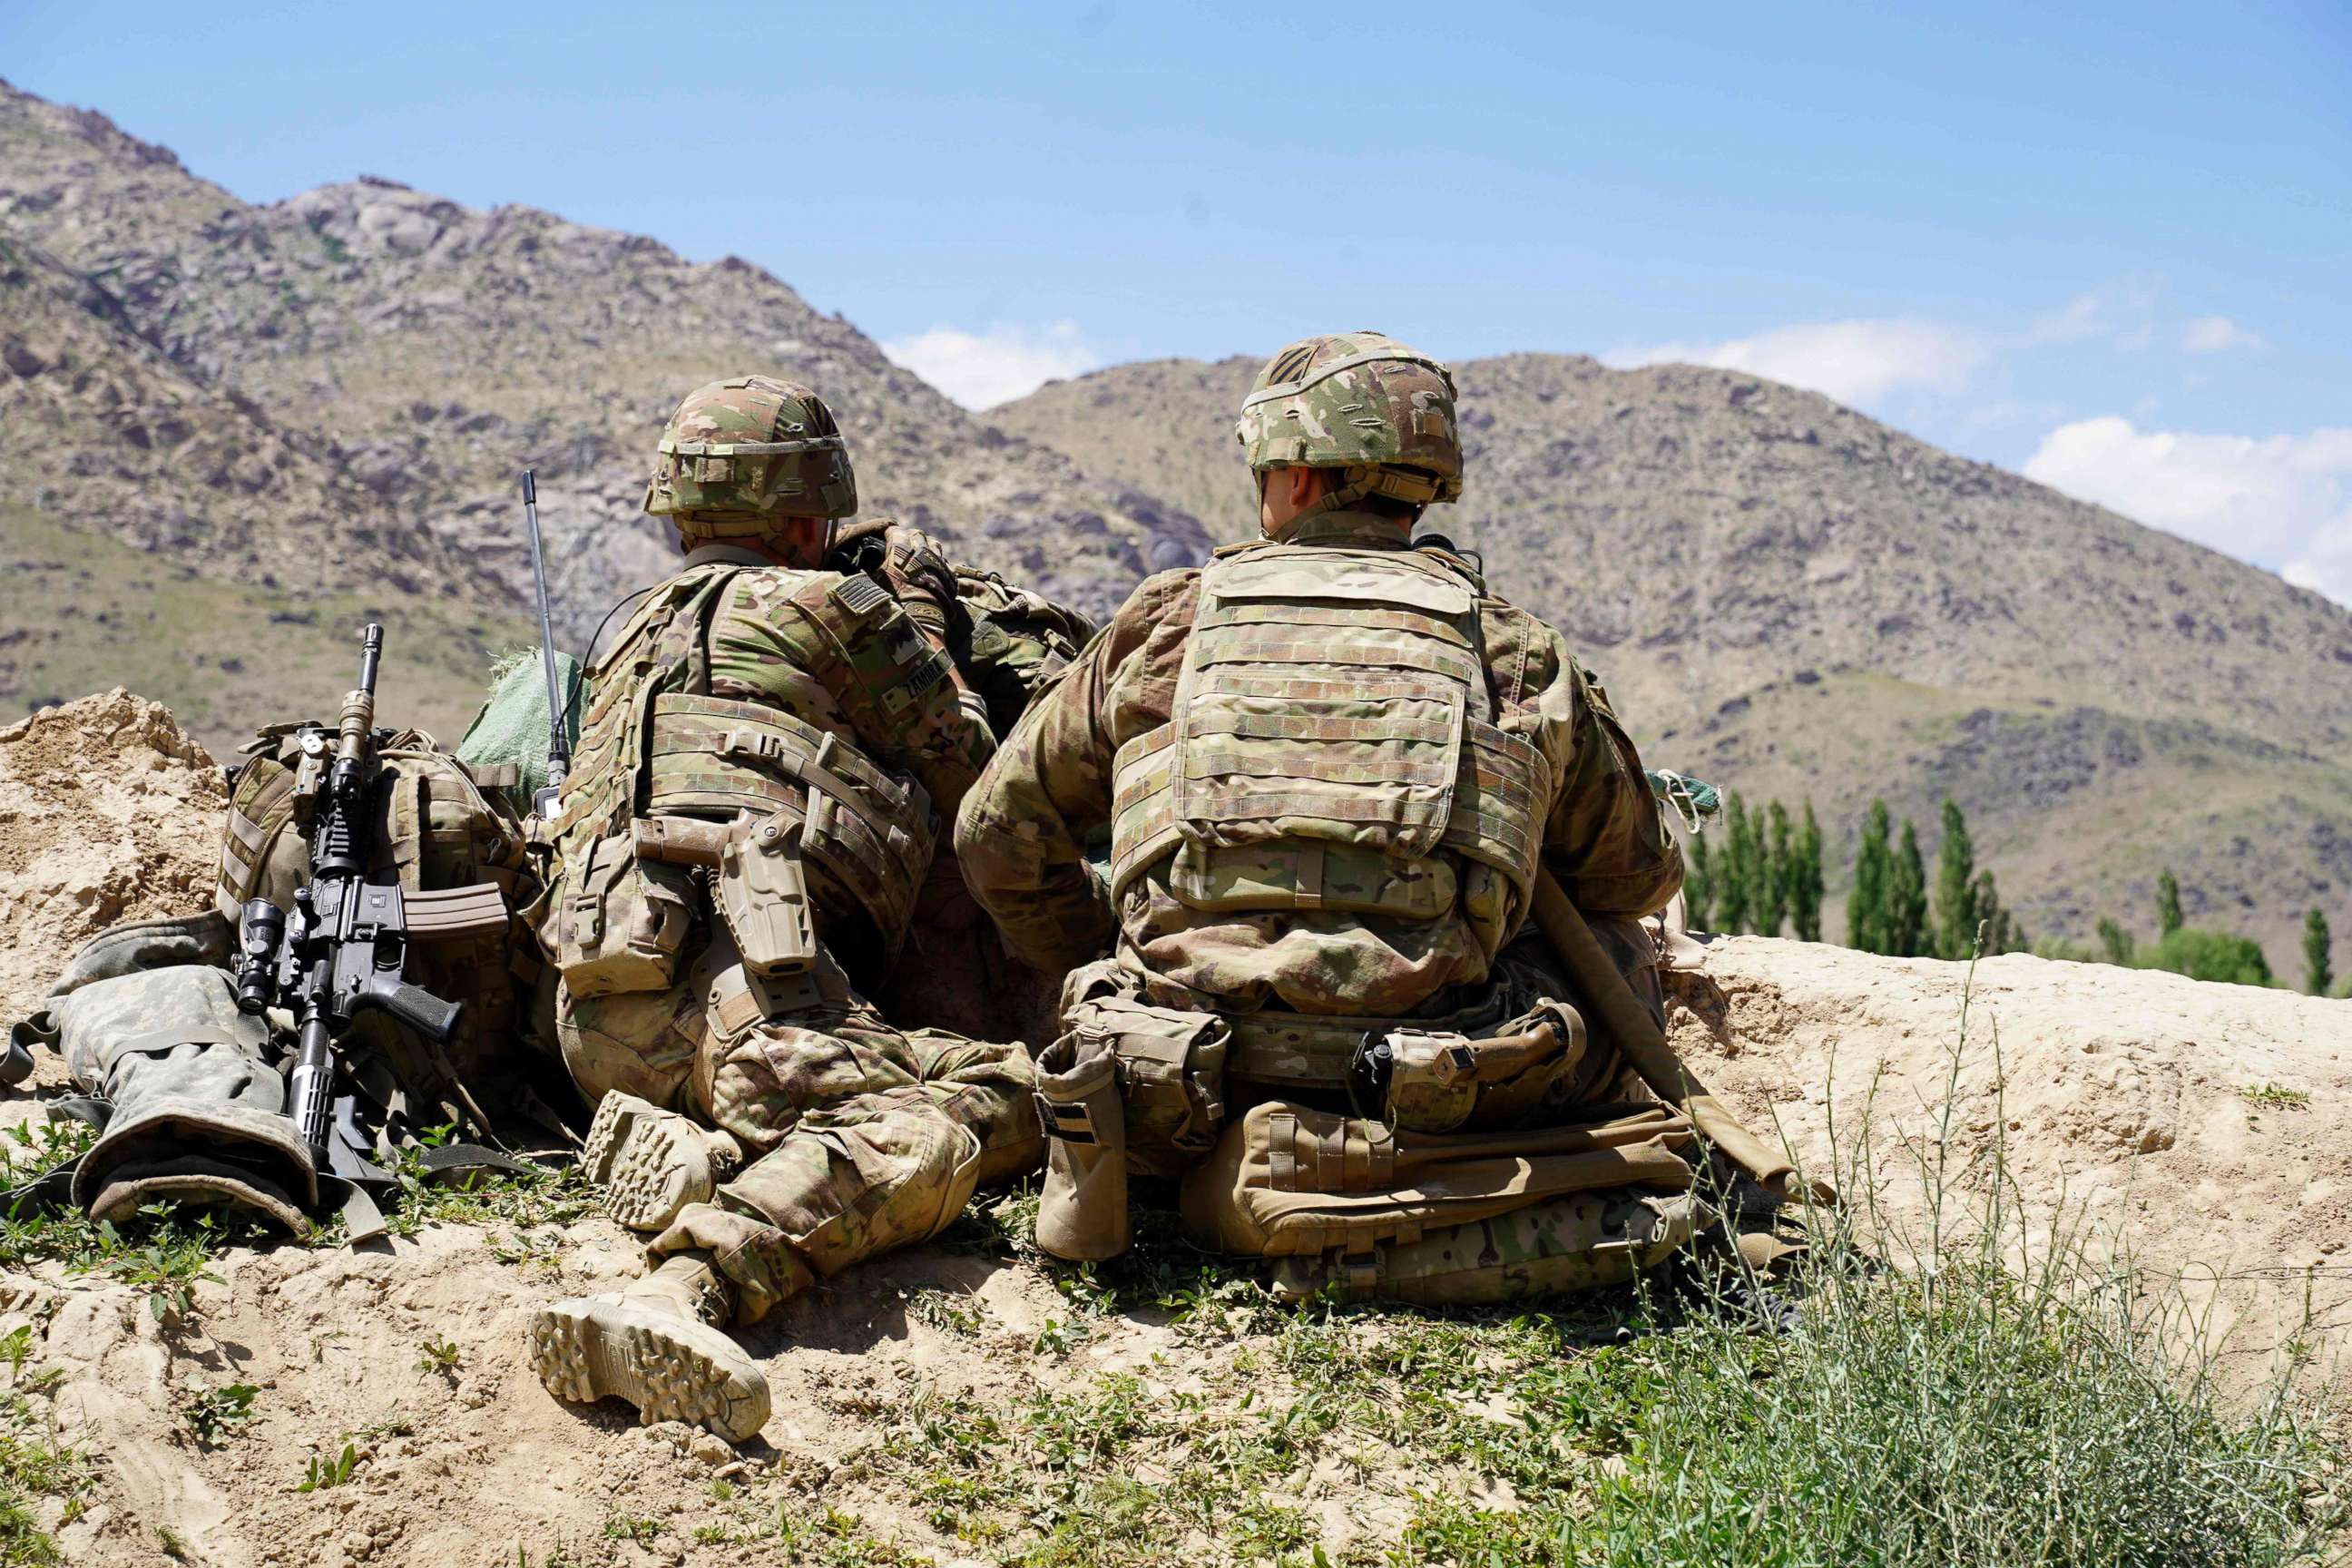 PHOTO: In this photo taken on June 6, 2019, U.S. soldiers look out over hillsides during a visit of the commander of U.S. and NATO forces in Afghanistan Gen. Scott Miller at the Afghan National Army (ANA) checkpoint in Nerkh district of Wardak province. 